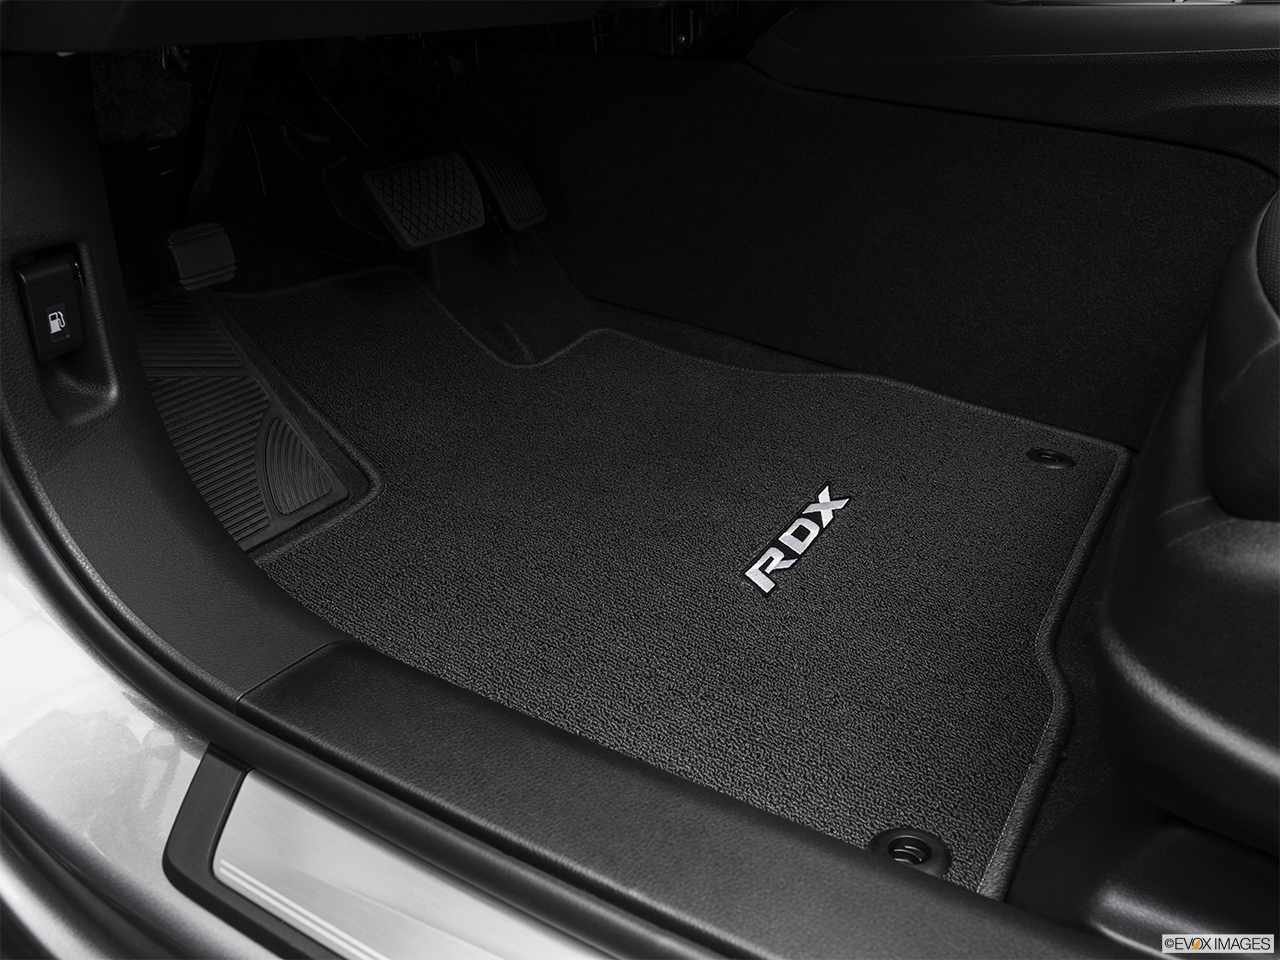 2017 Acura RDX AWD Driver's floor mat and pedals. Mid-seat level from outside looking in. 